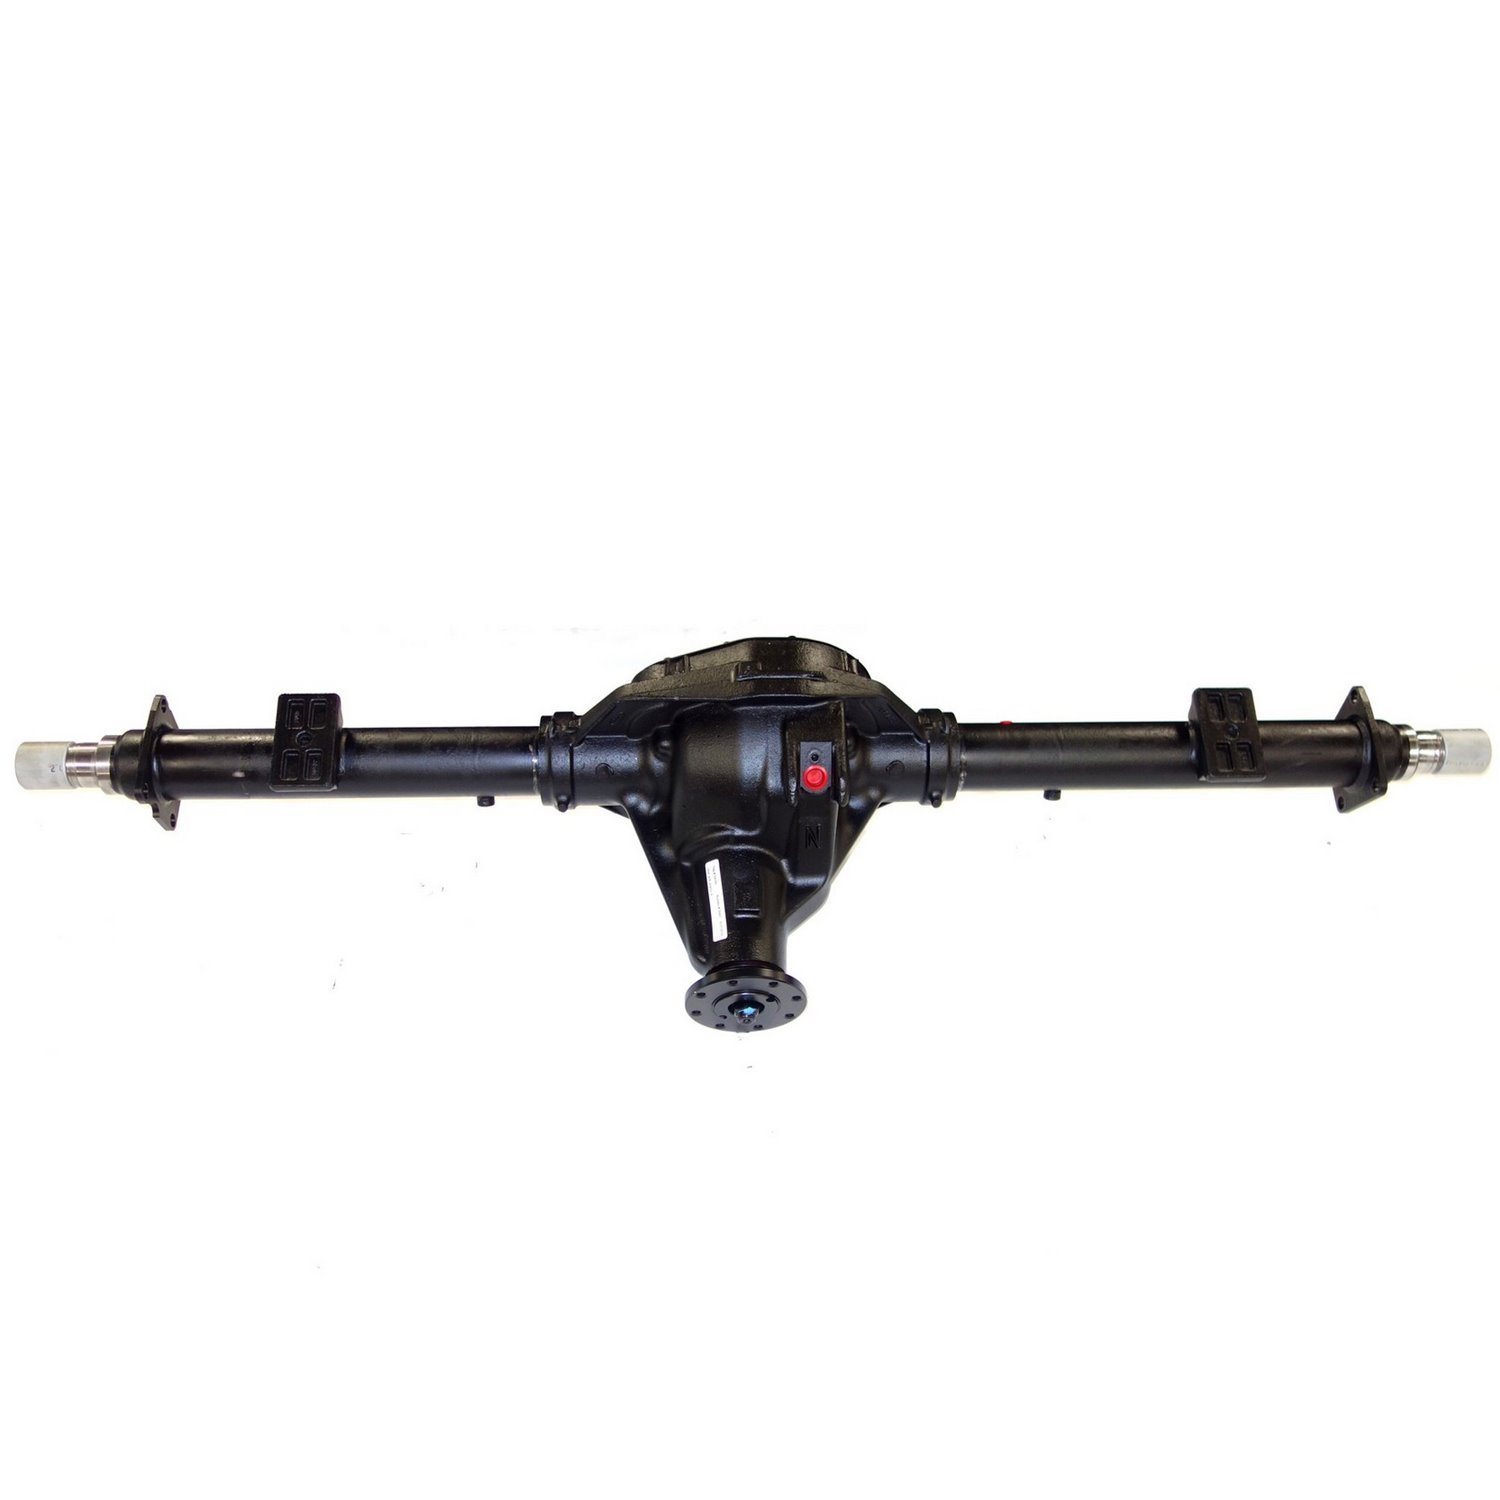 Remanufactured Complete Axle Assembly for 10.25" 87-97 F250 & F350 3.55 , ABS, SRW, Ff